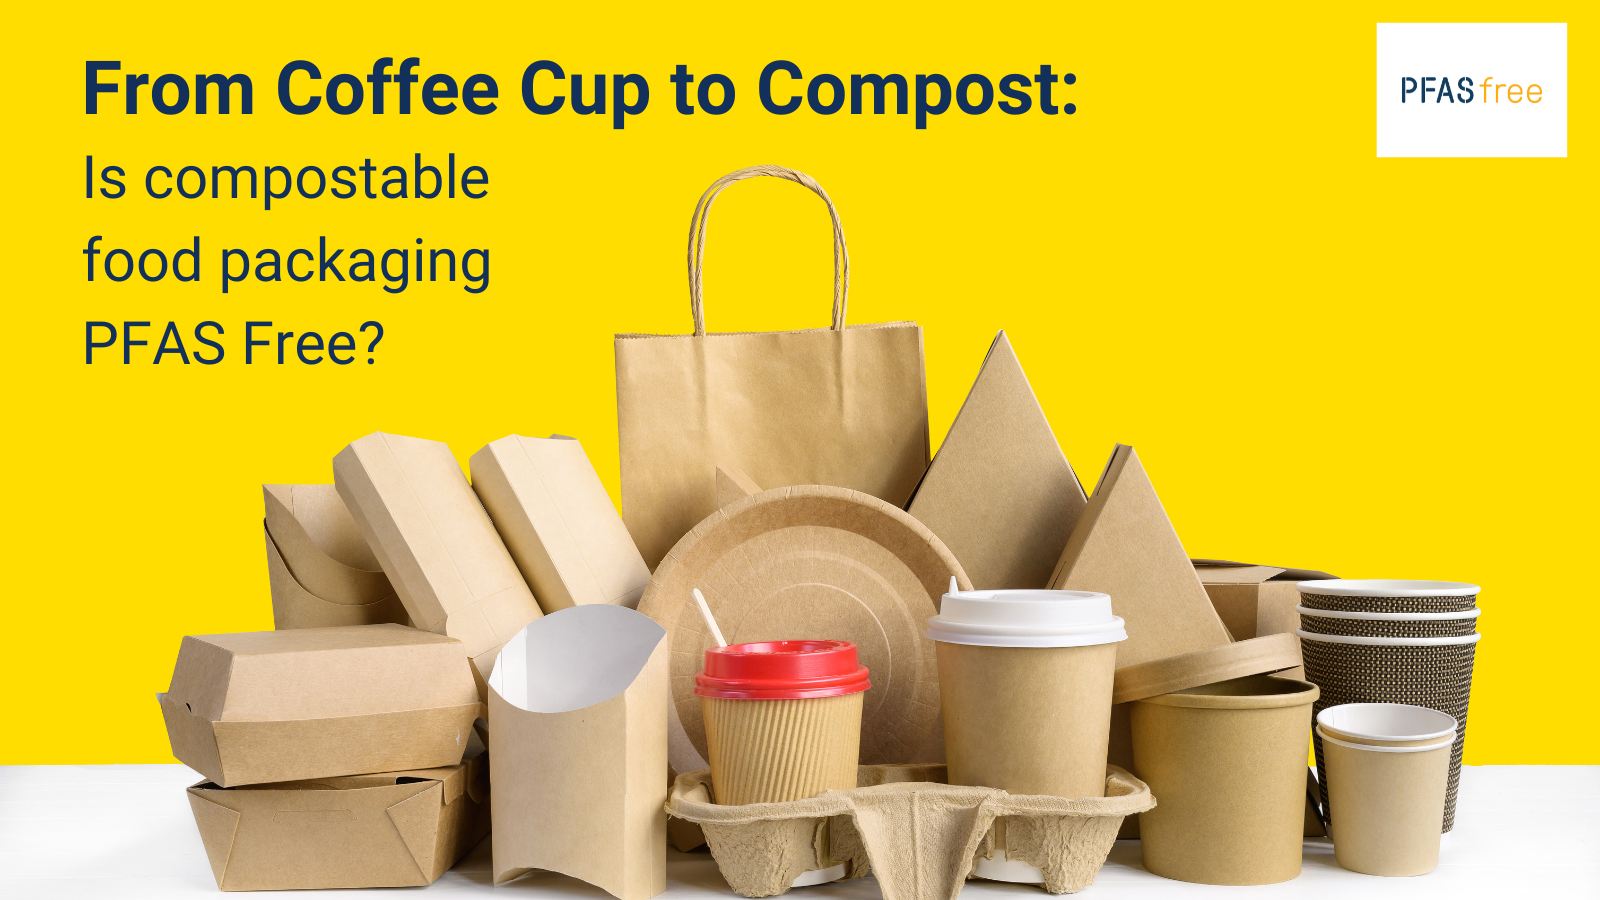 Compostable food packaging is becoming a increasingly popular alternative to single use plastic, but PFAS in compostable packaging can enter into the environment